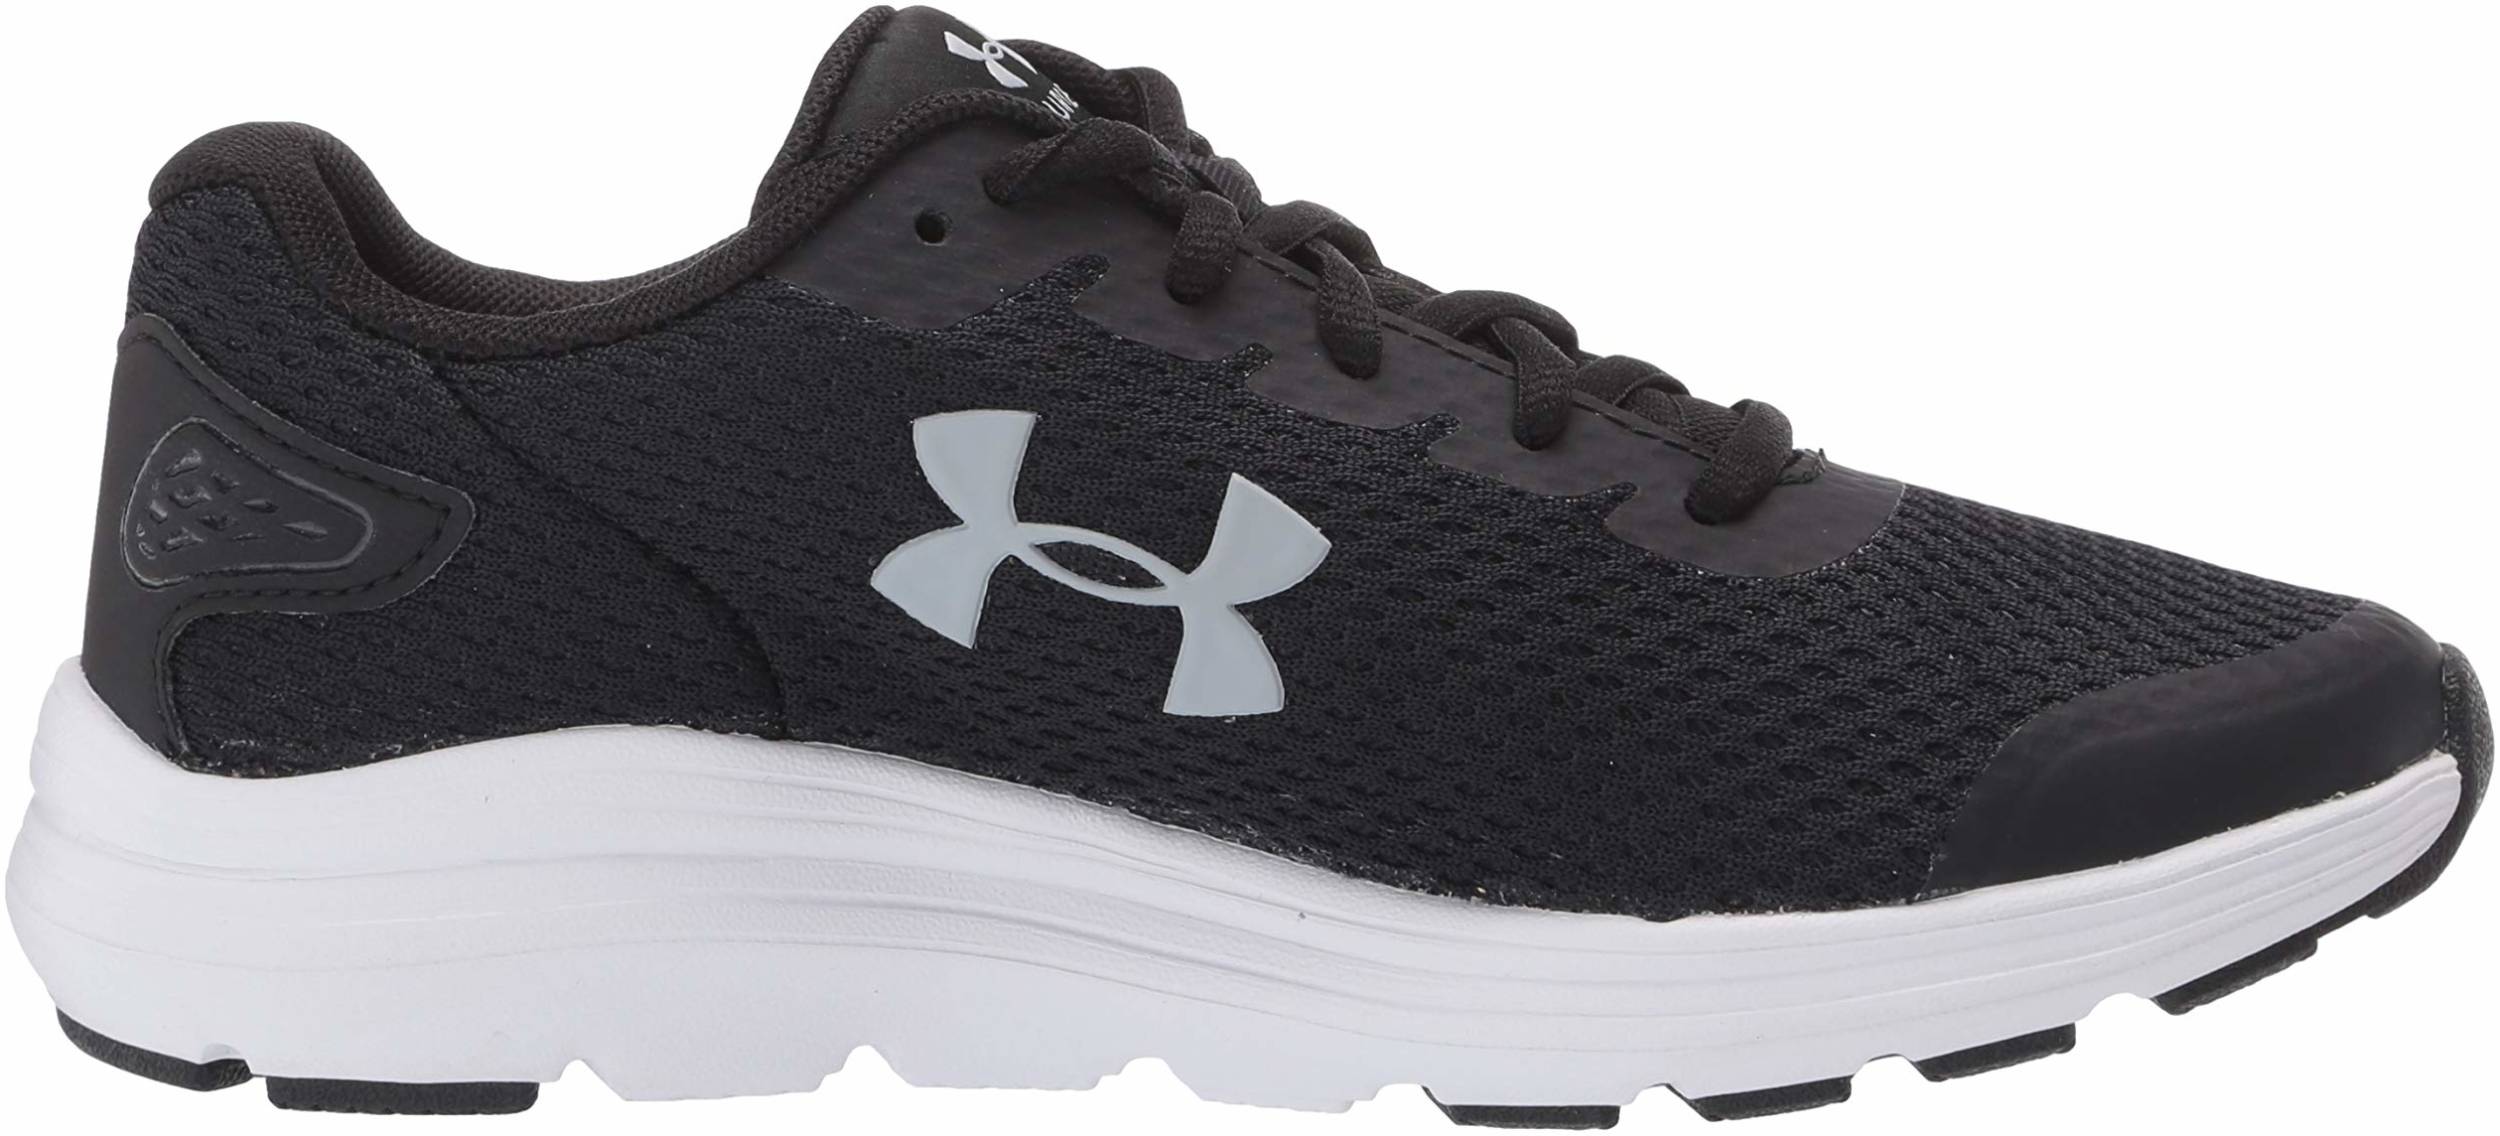 Under Armour Men's Surge 2 Running Shoes